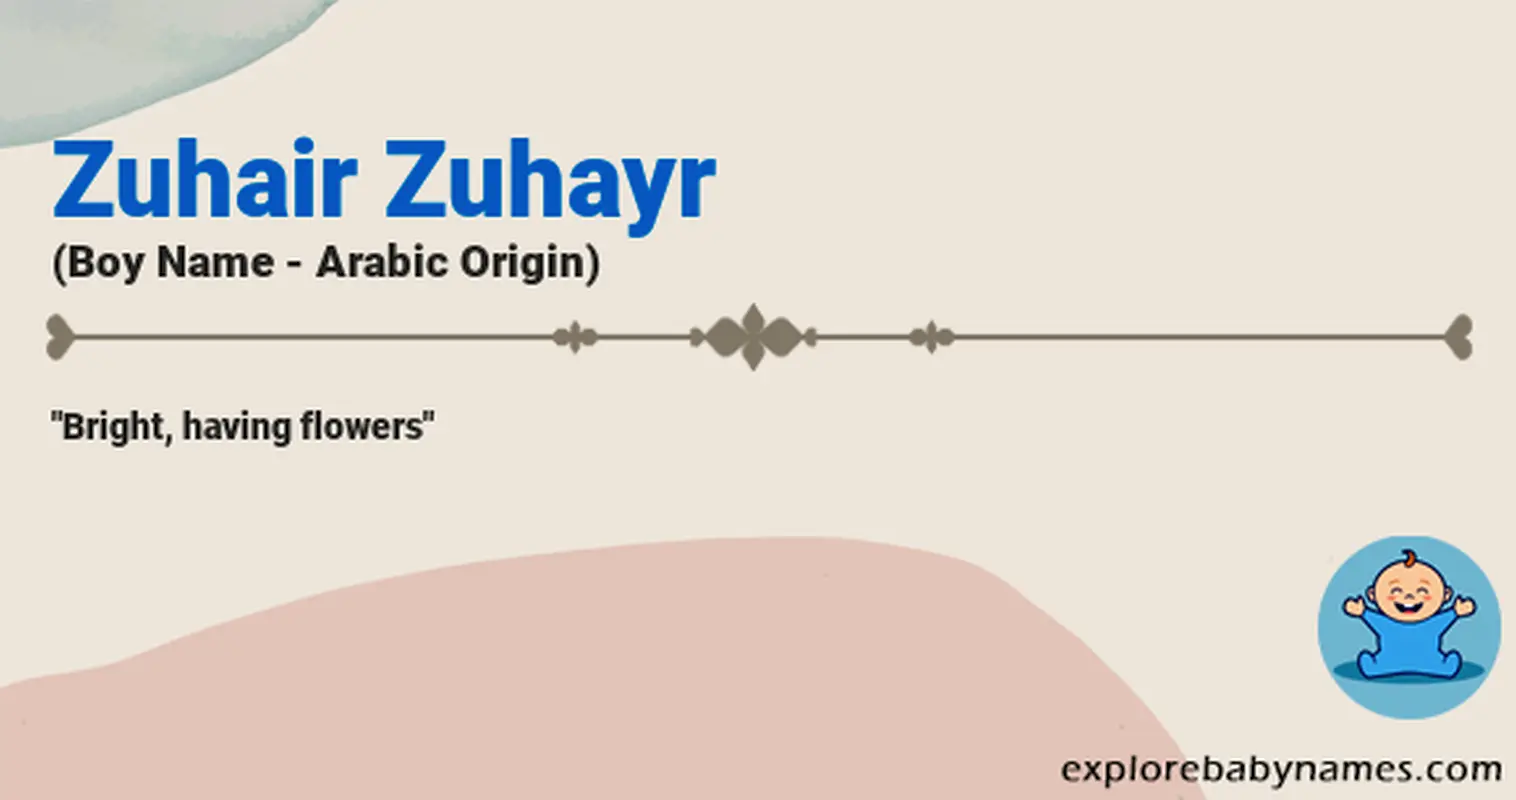 Meaning of Zuhair Zuhayr